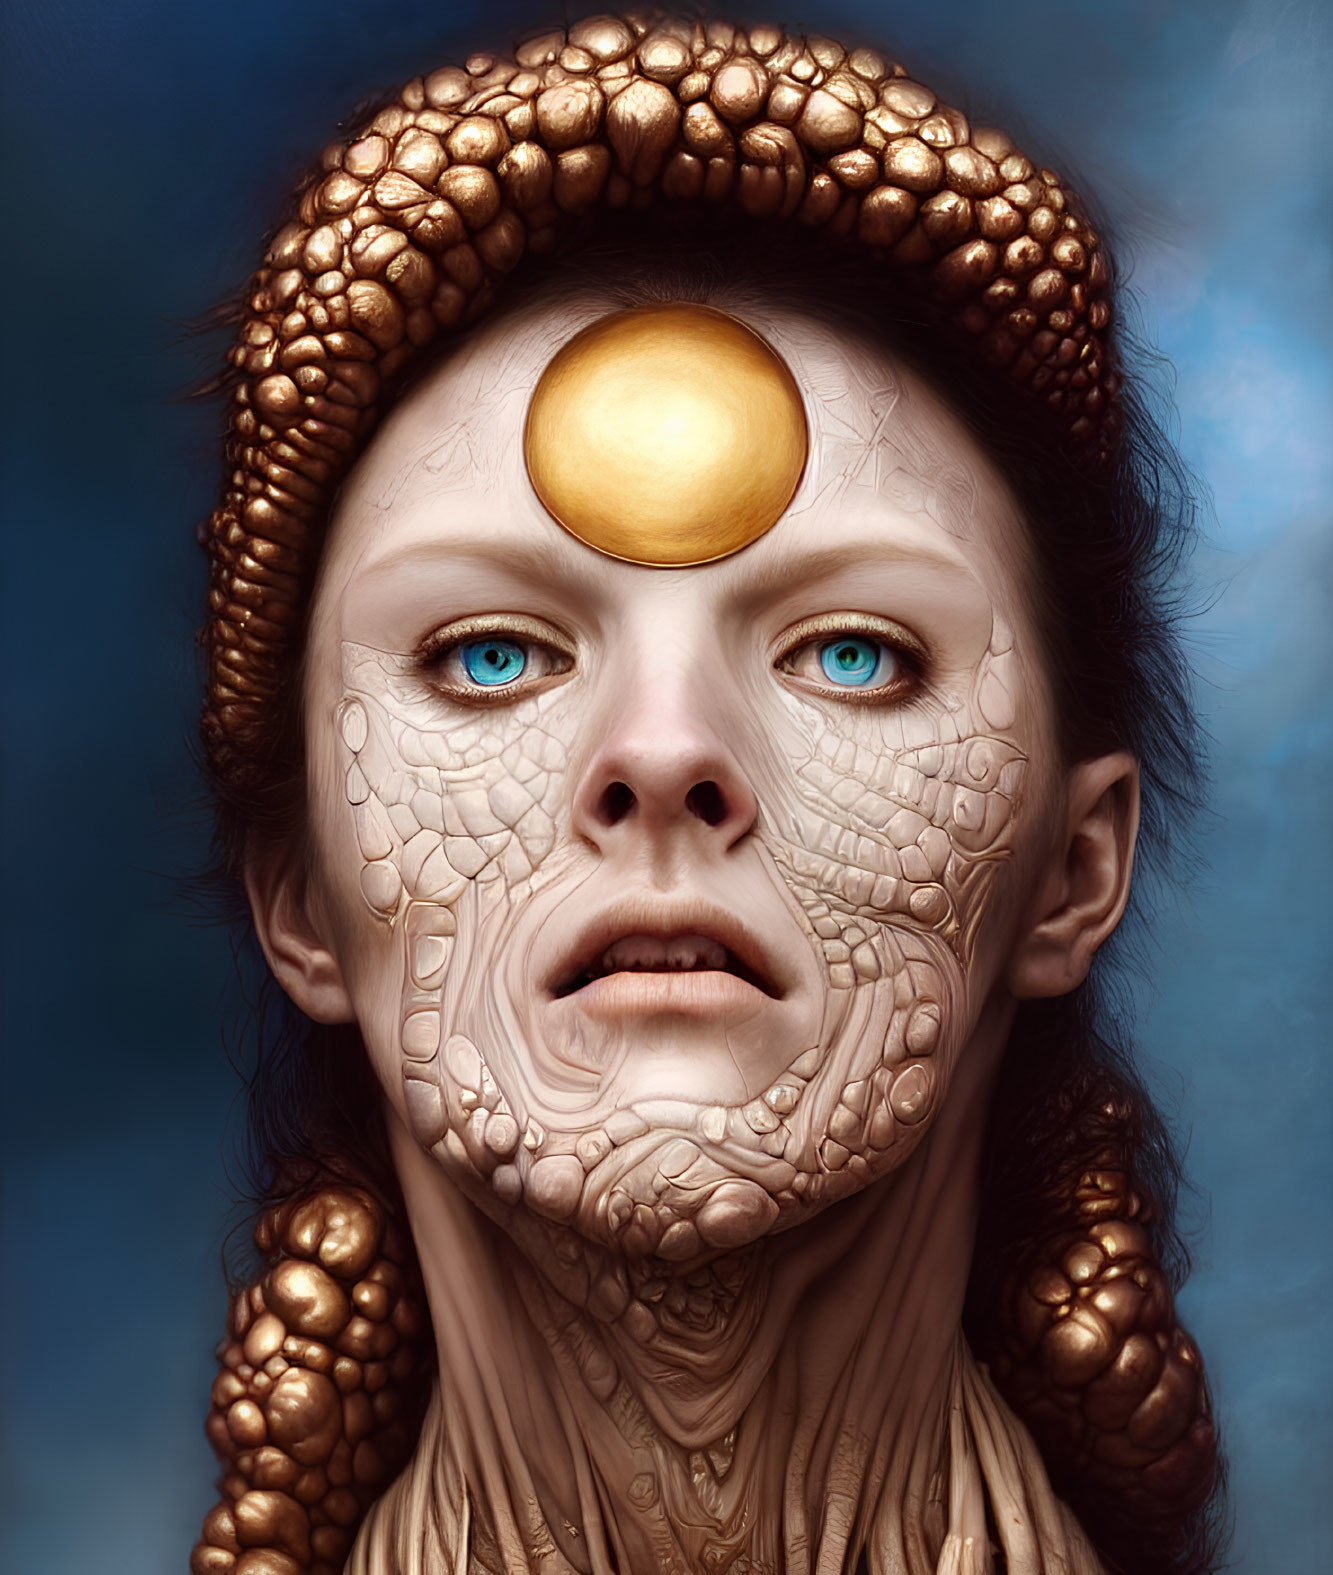 Surreal portrait of person with cracked skin, blue eyes, golden orb, and scaled headdress